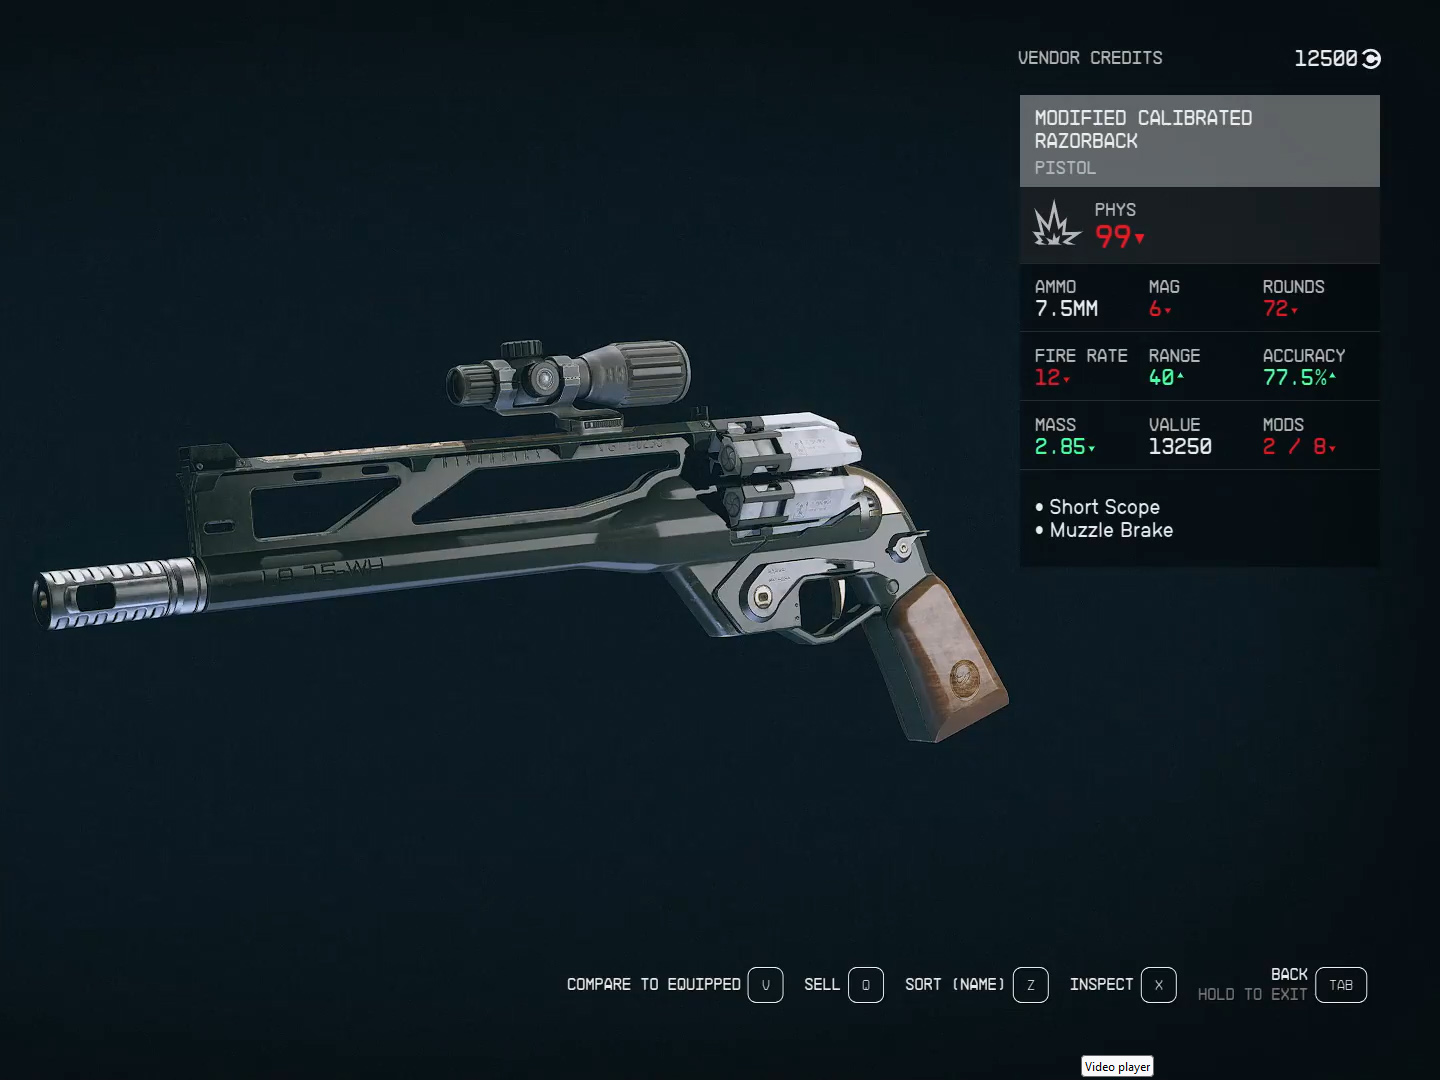 Razorback pistol usually shoots 12 times in a minute